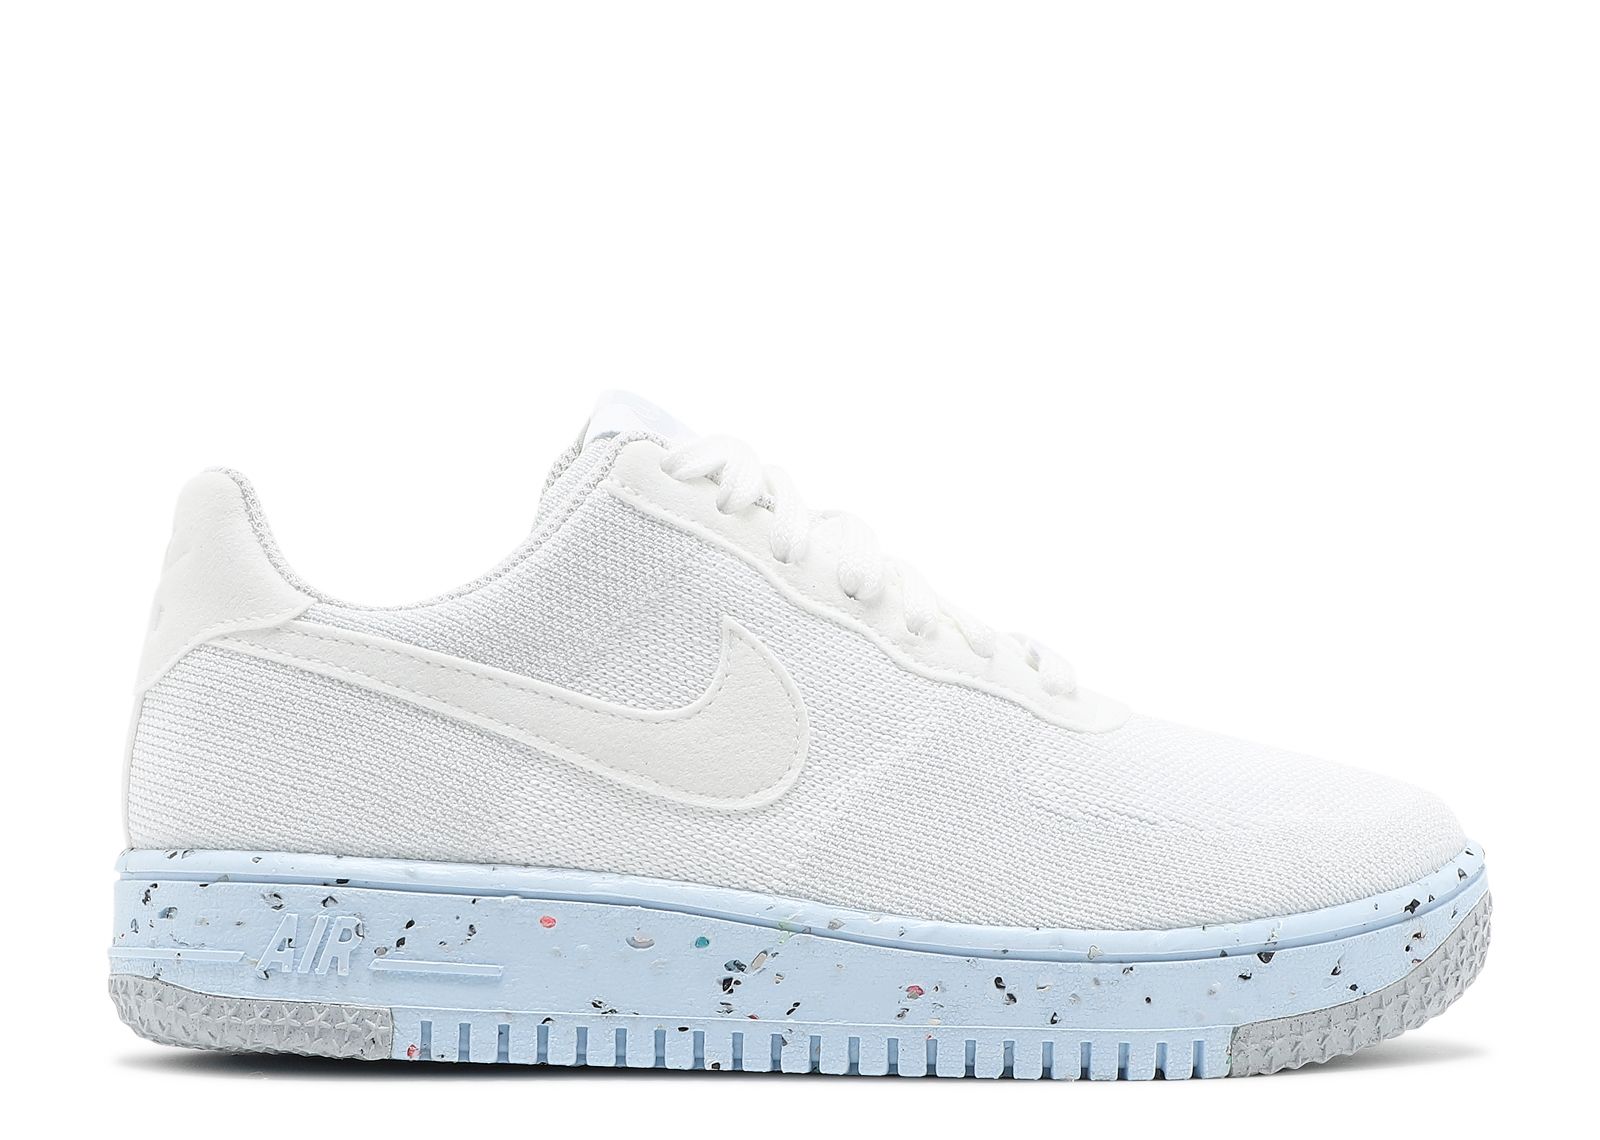 Charles Keasing Finalmente Semicírculo Wmns Air Force 1 Crater Flyknit 'Pure Platinum' - Nike - DC7273 100 -  white/pure platinum/white | Flight Club